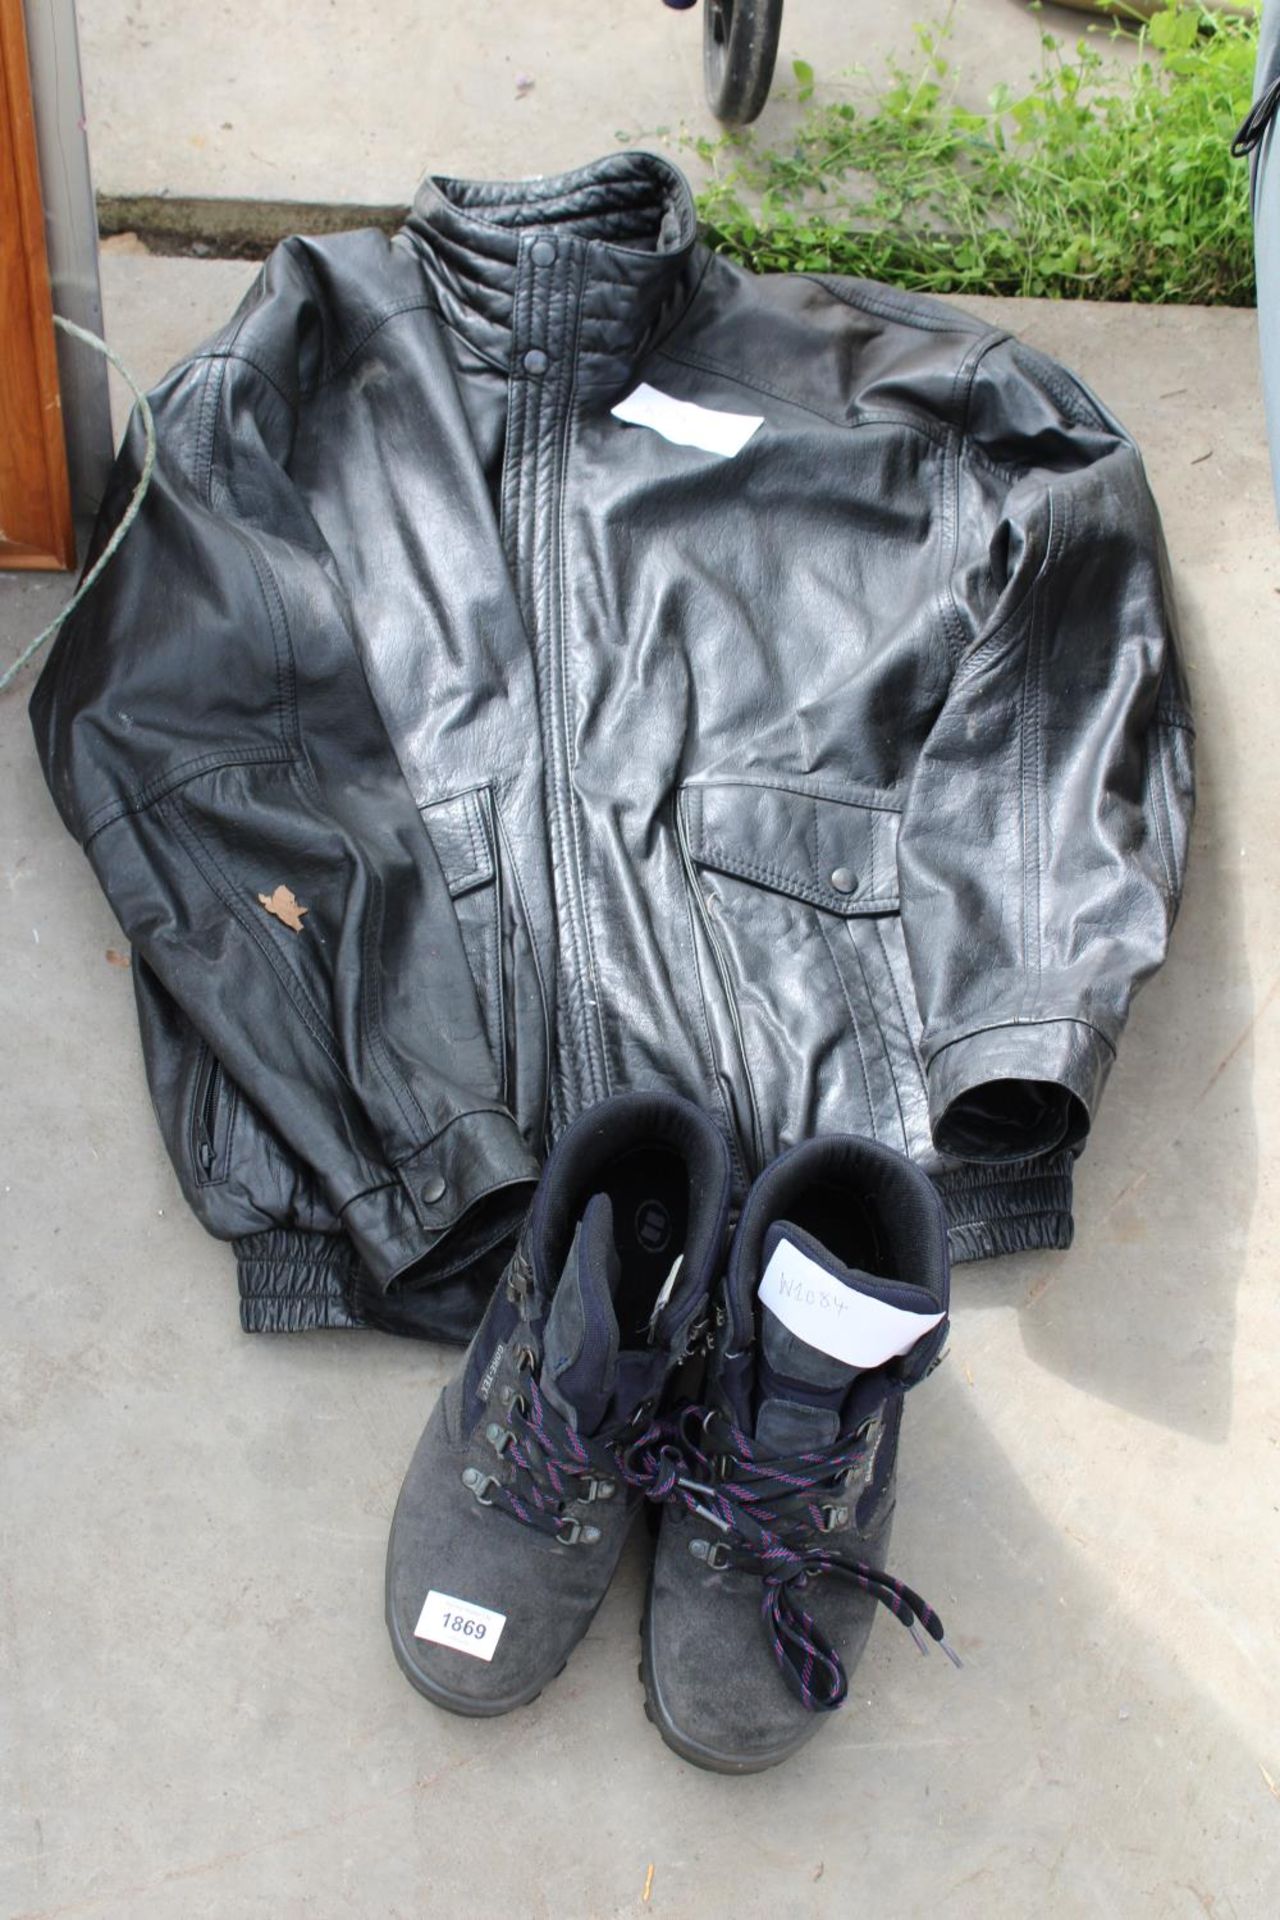 A LEATHER JACKET AND A PAIR OF GORE-TEX BOOTS